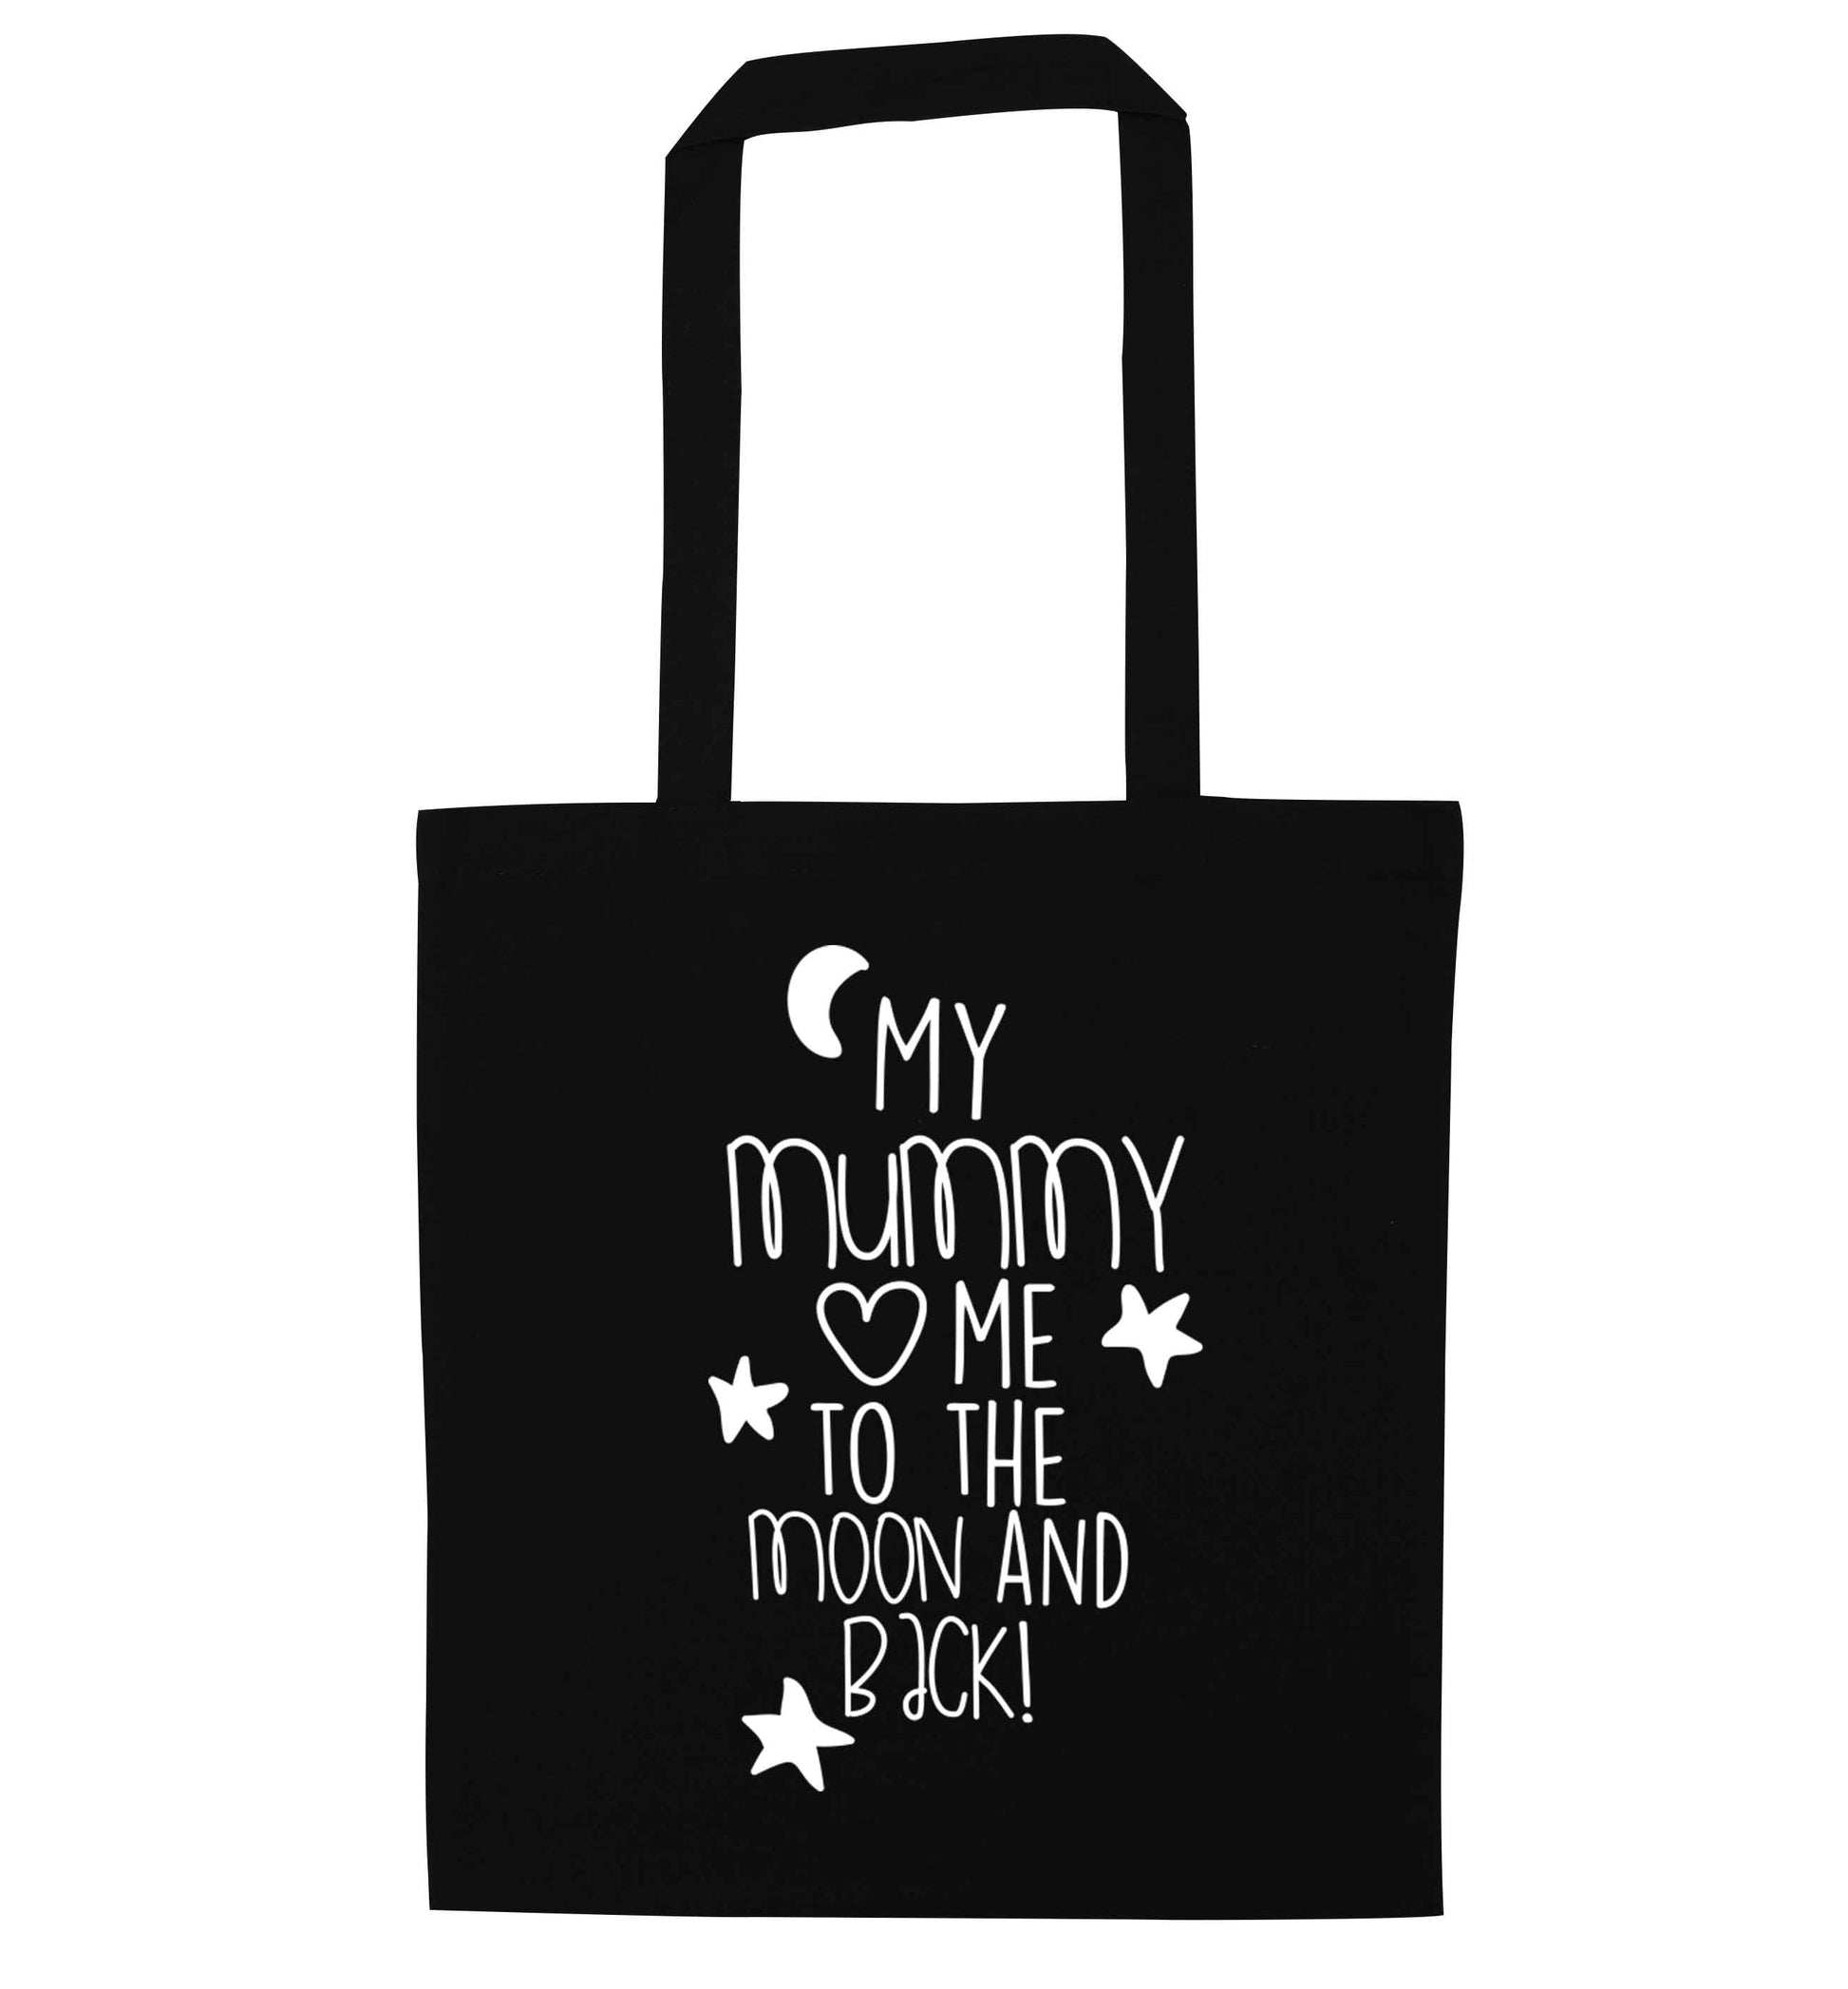 My mum loves me to the moon and back black tote bag